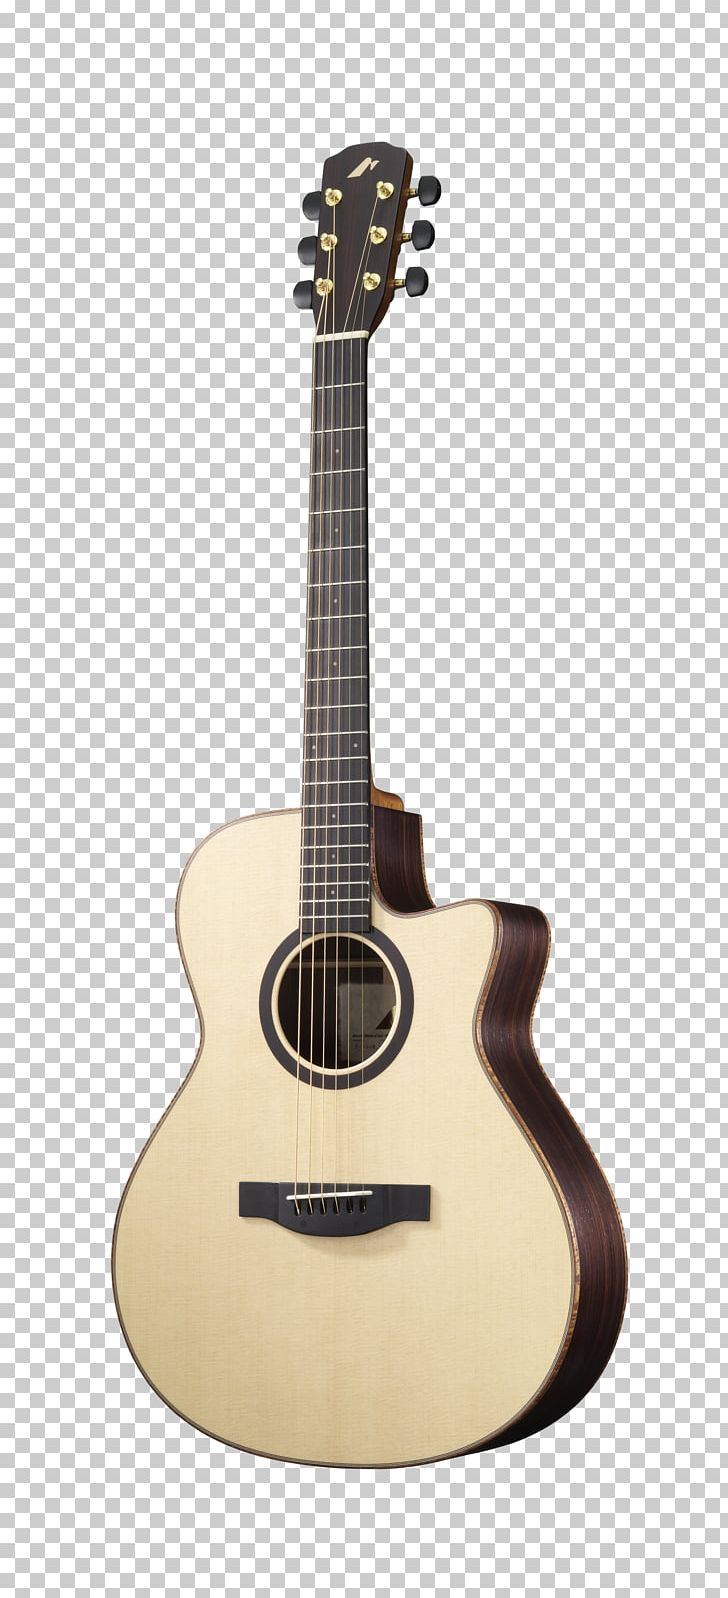 Acoustic Guitar Acoustic-electric Guitar Guitar Bracing Taylor Guitars PNG, Clipart, Acoustic Electric Guitar, Cutaway, Guitar Accessory, Planetarium Software, Plucked String Instruments Free PNG Download